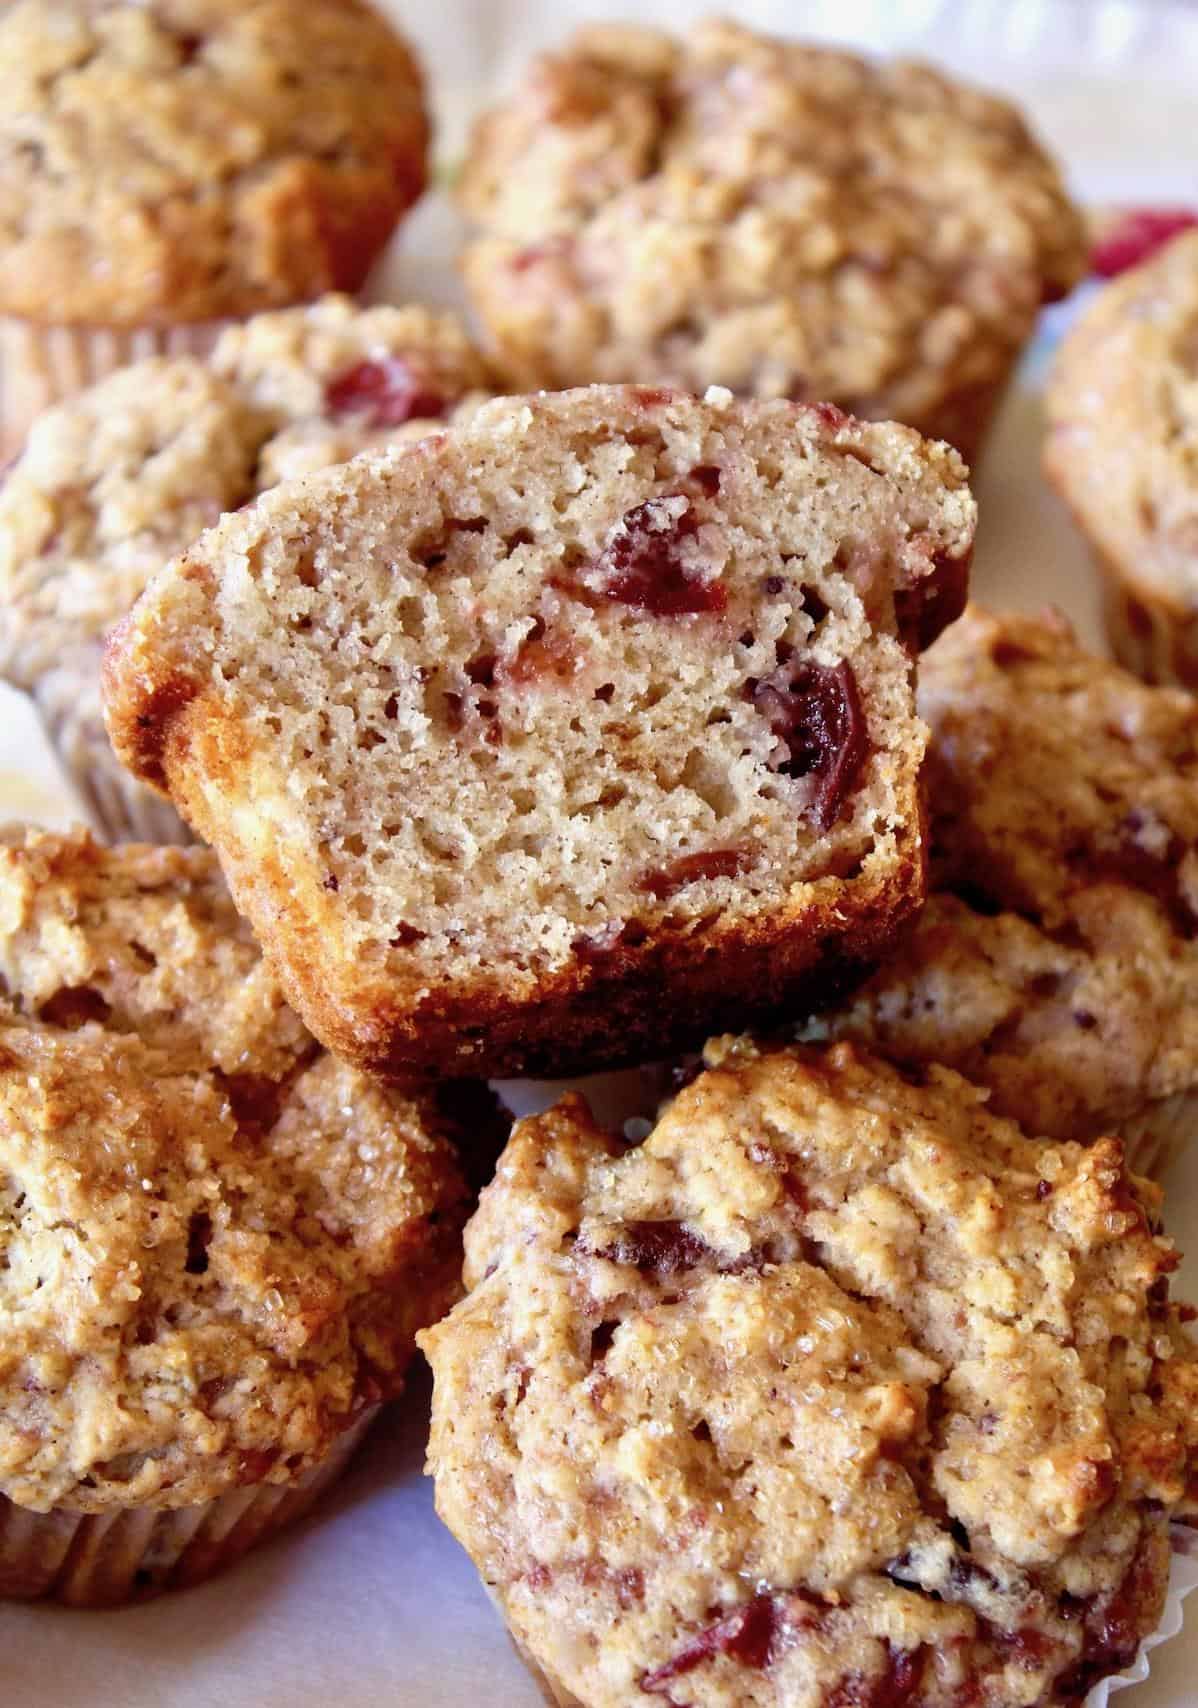  Get ready to indulge in the ultimate gluten-free treat.